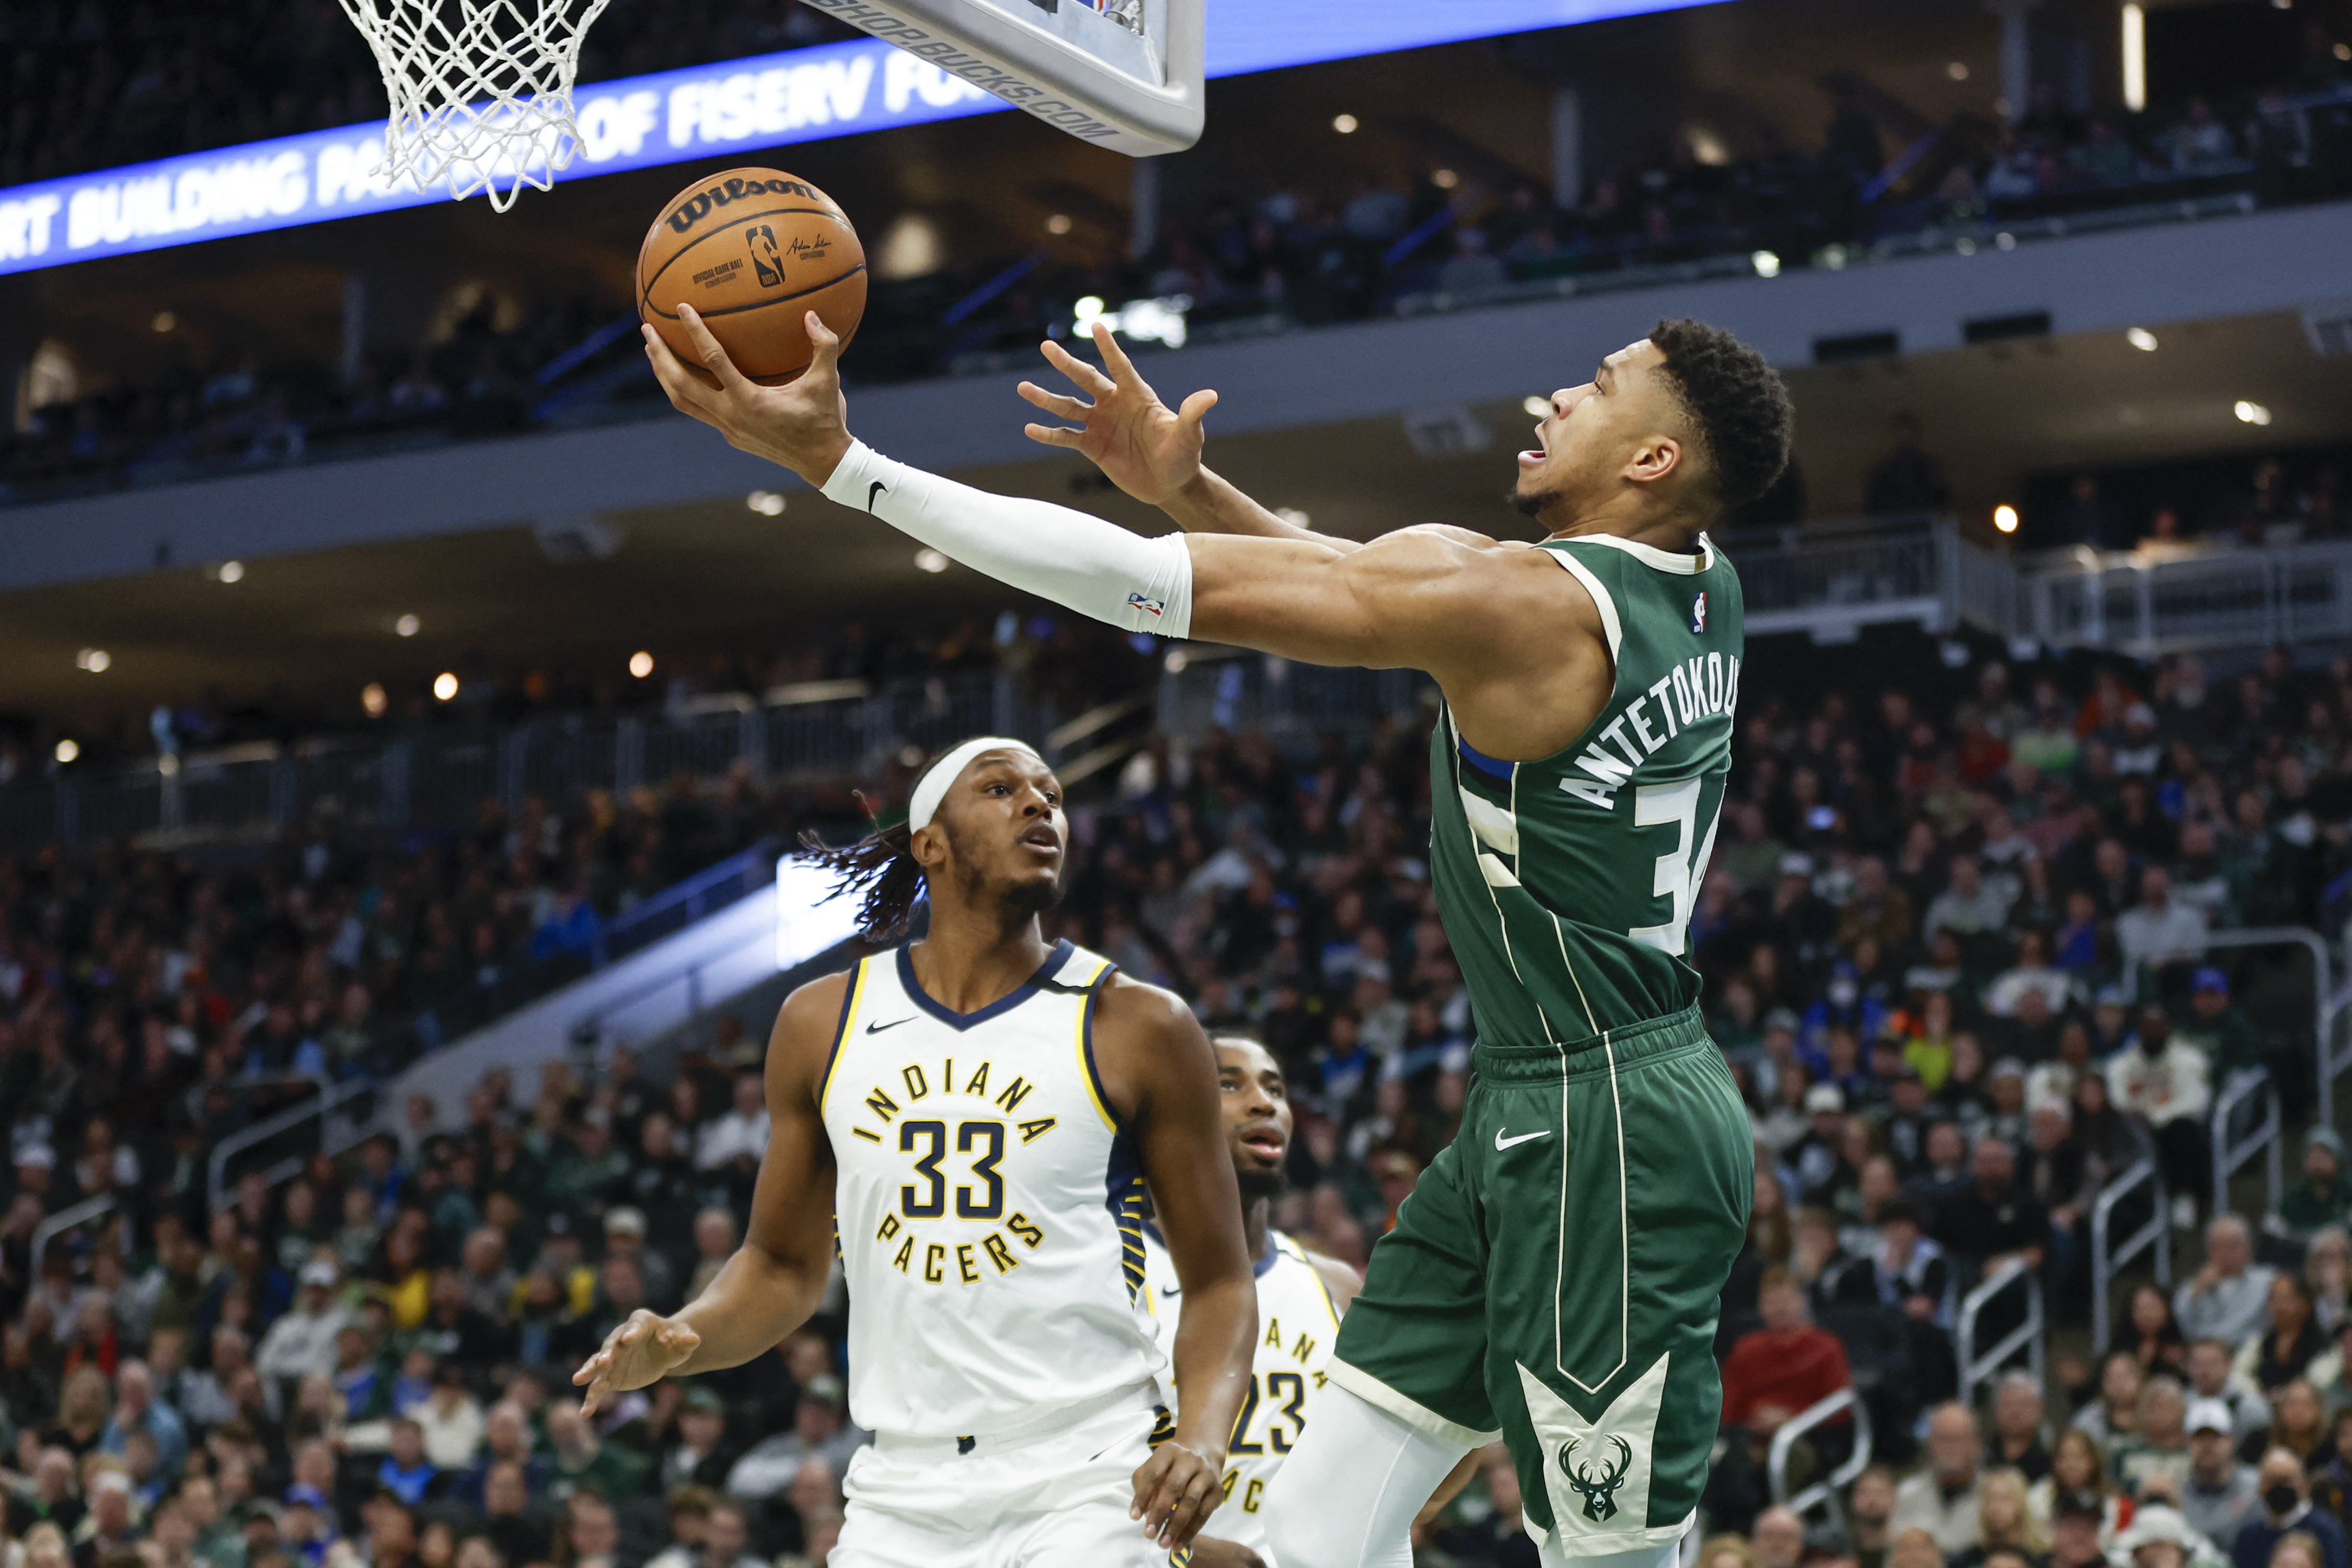 Pacers' backcourt shines in win over Bucks